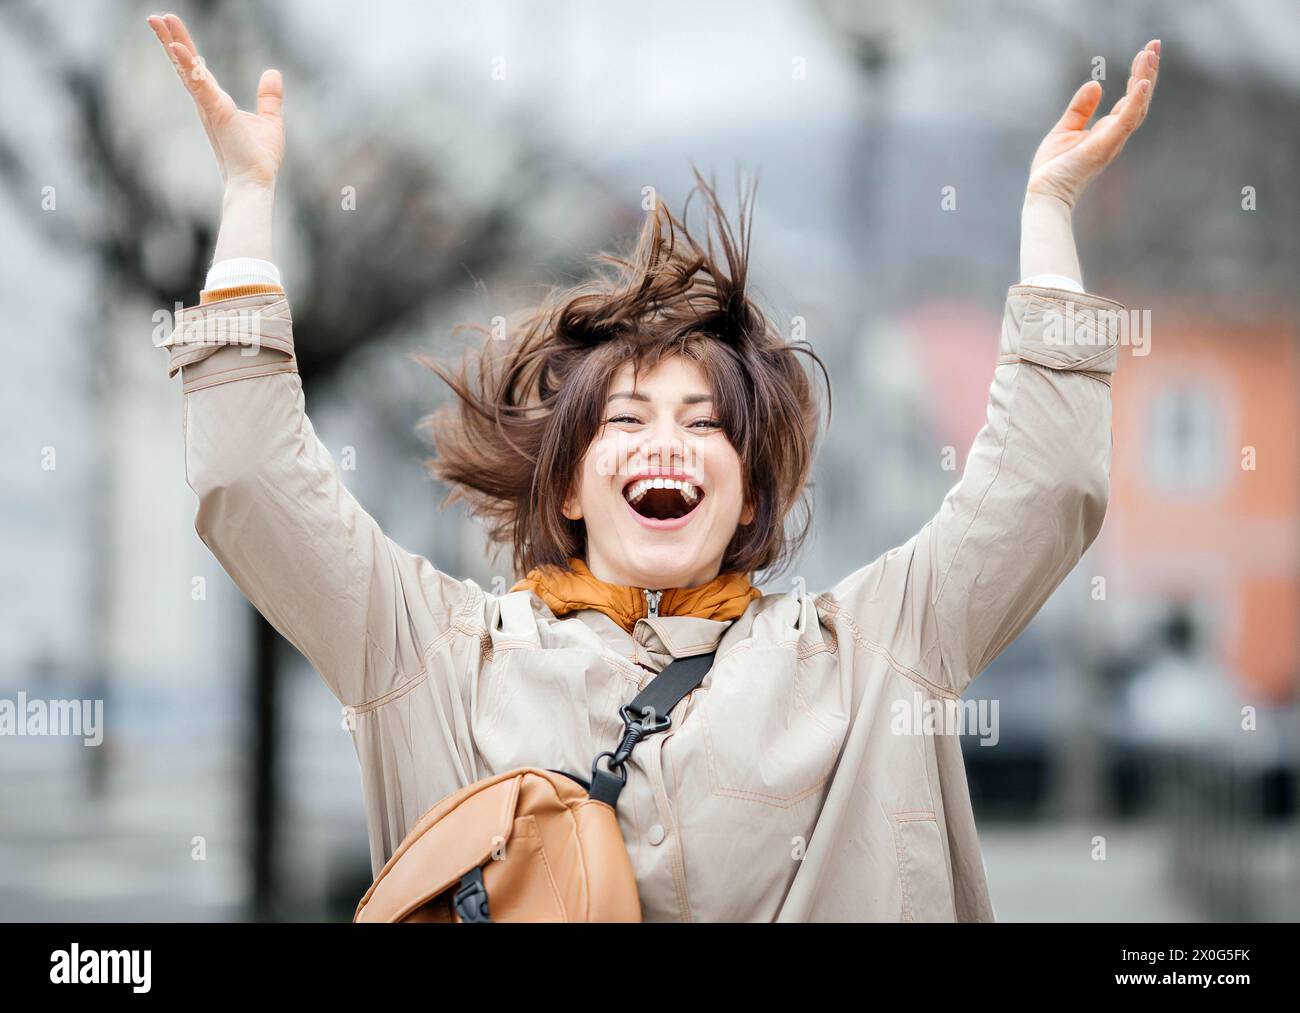 Ecstatic Young Woman Celebrating with Arms Raised in the City Stock Photo